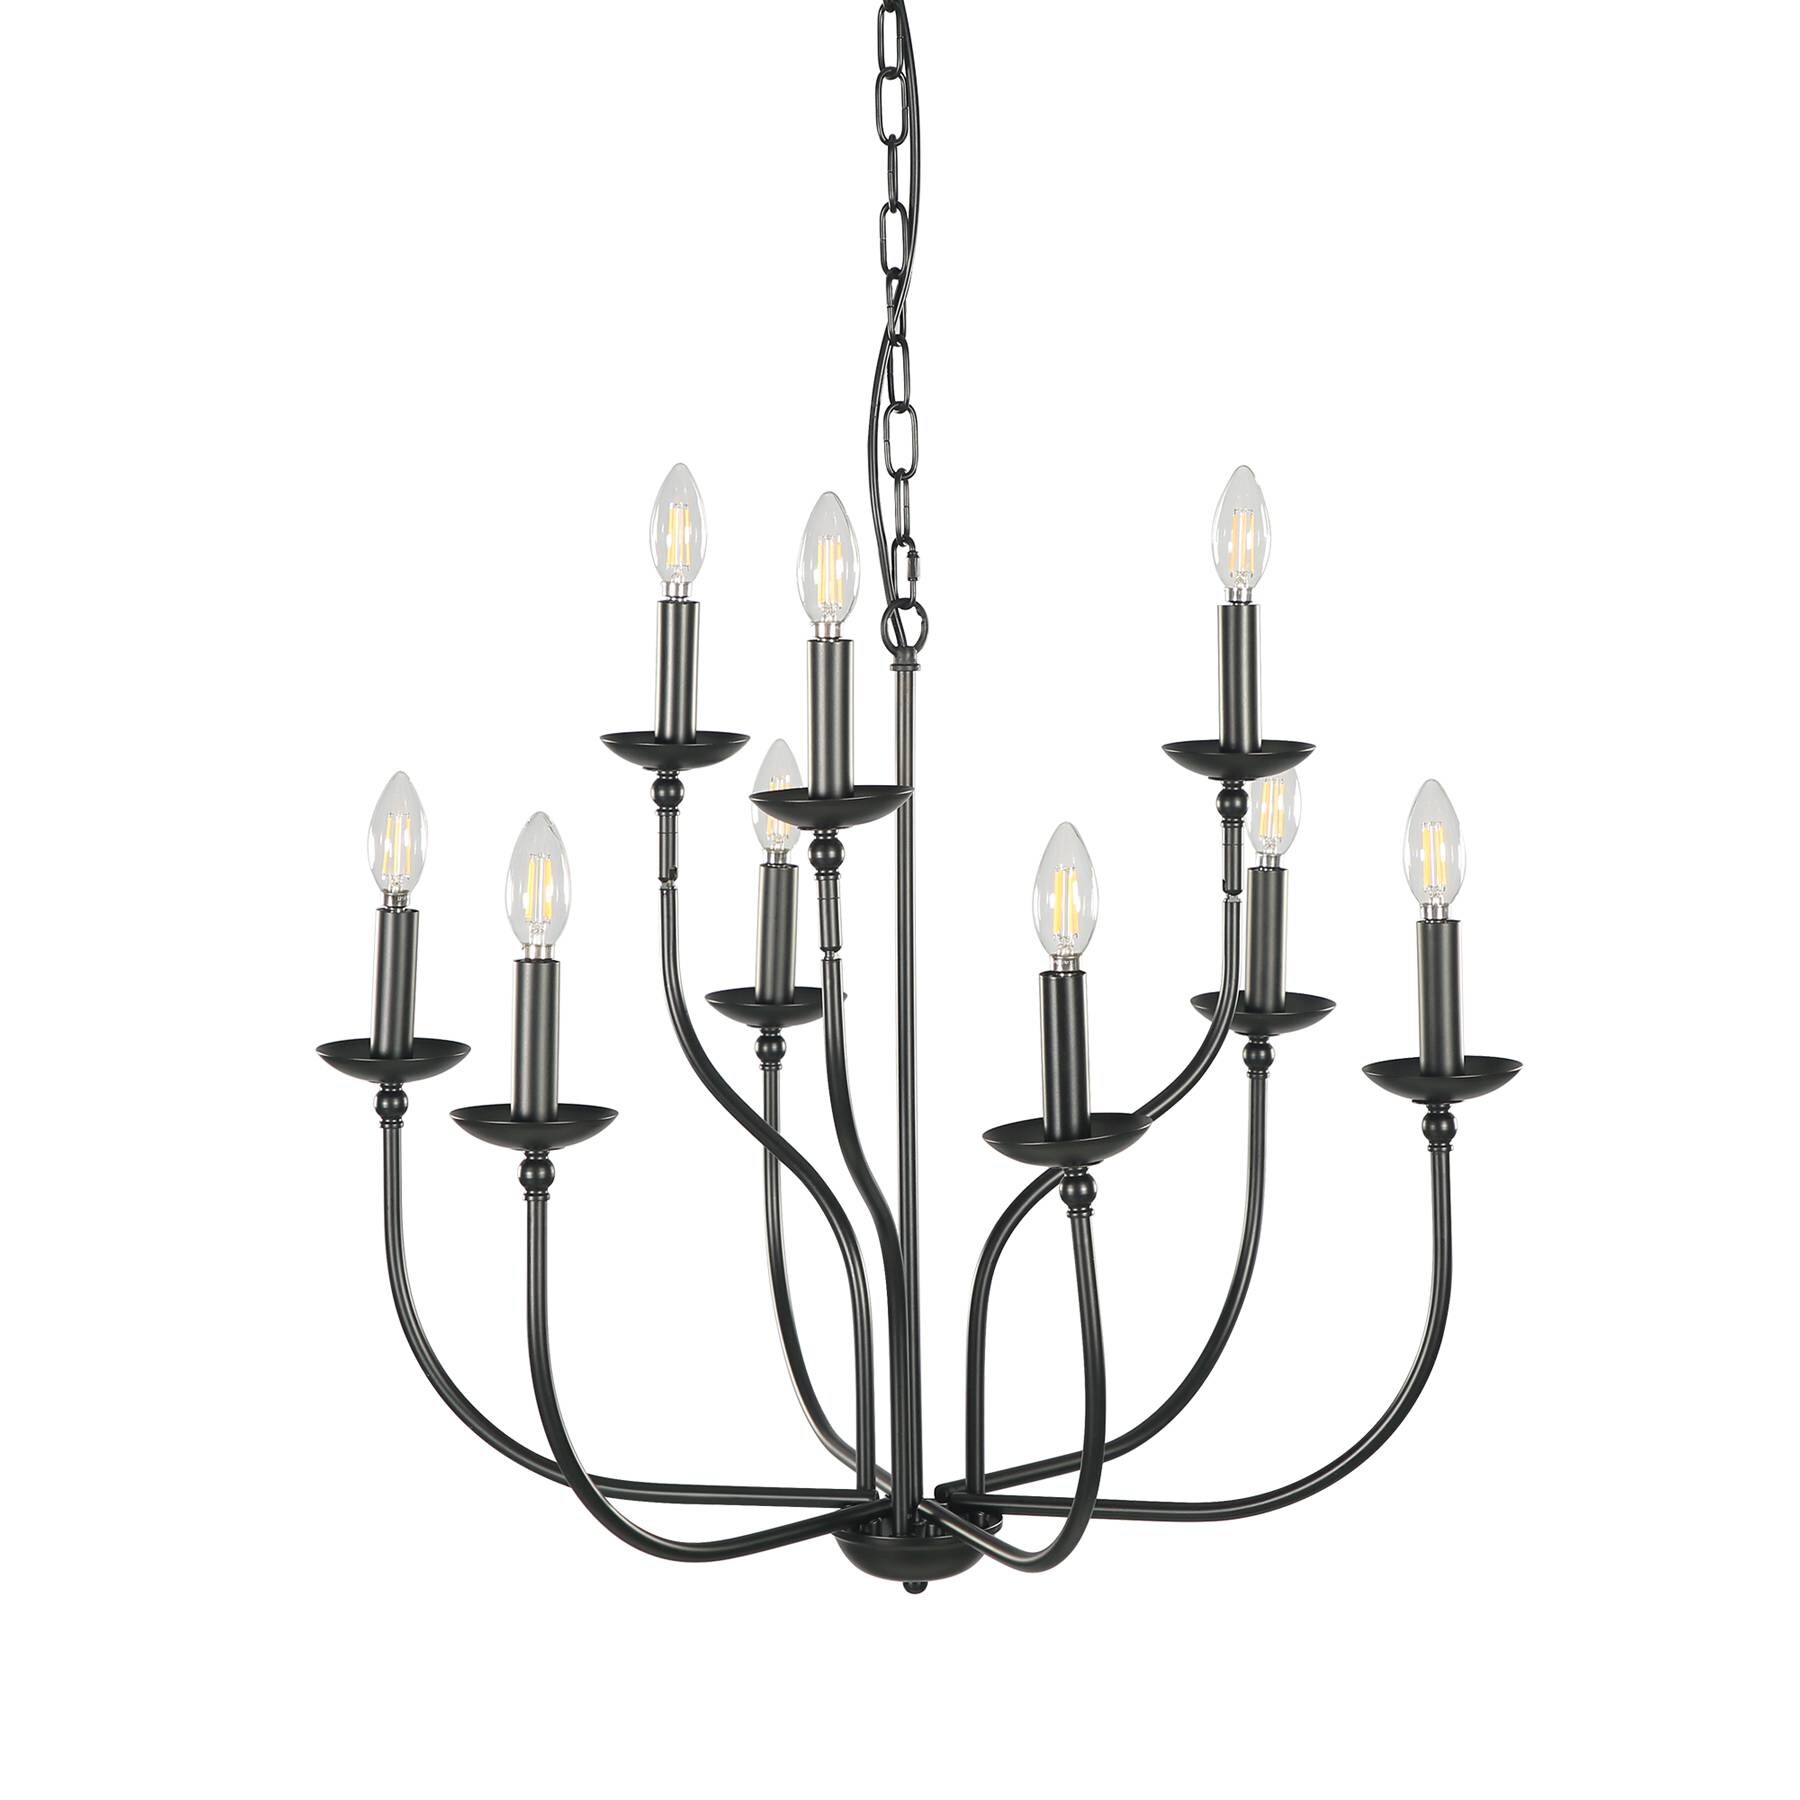 Tribesigns Th-sf0103 9-Light Black French Country/Cottage Dry Rated ...